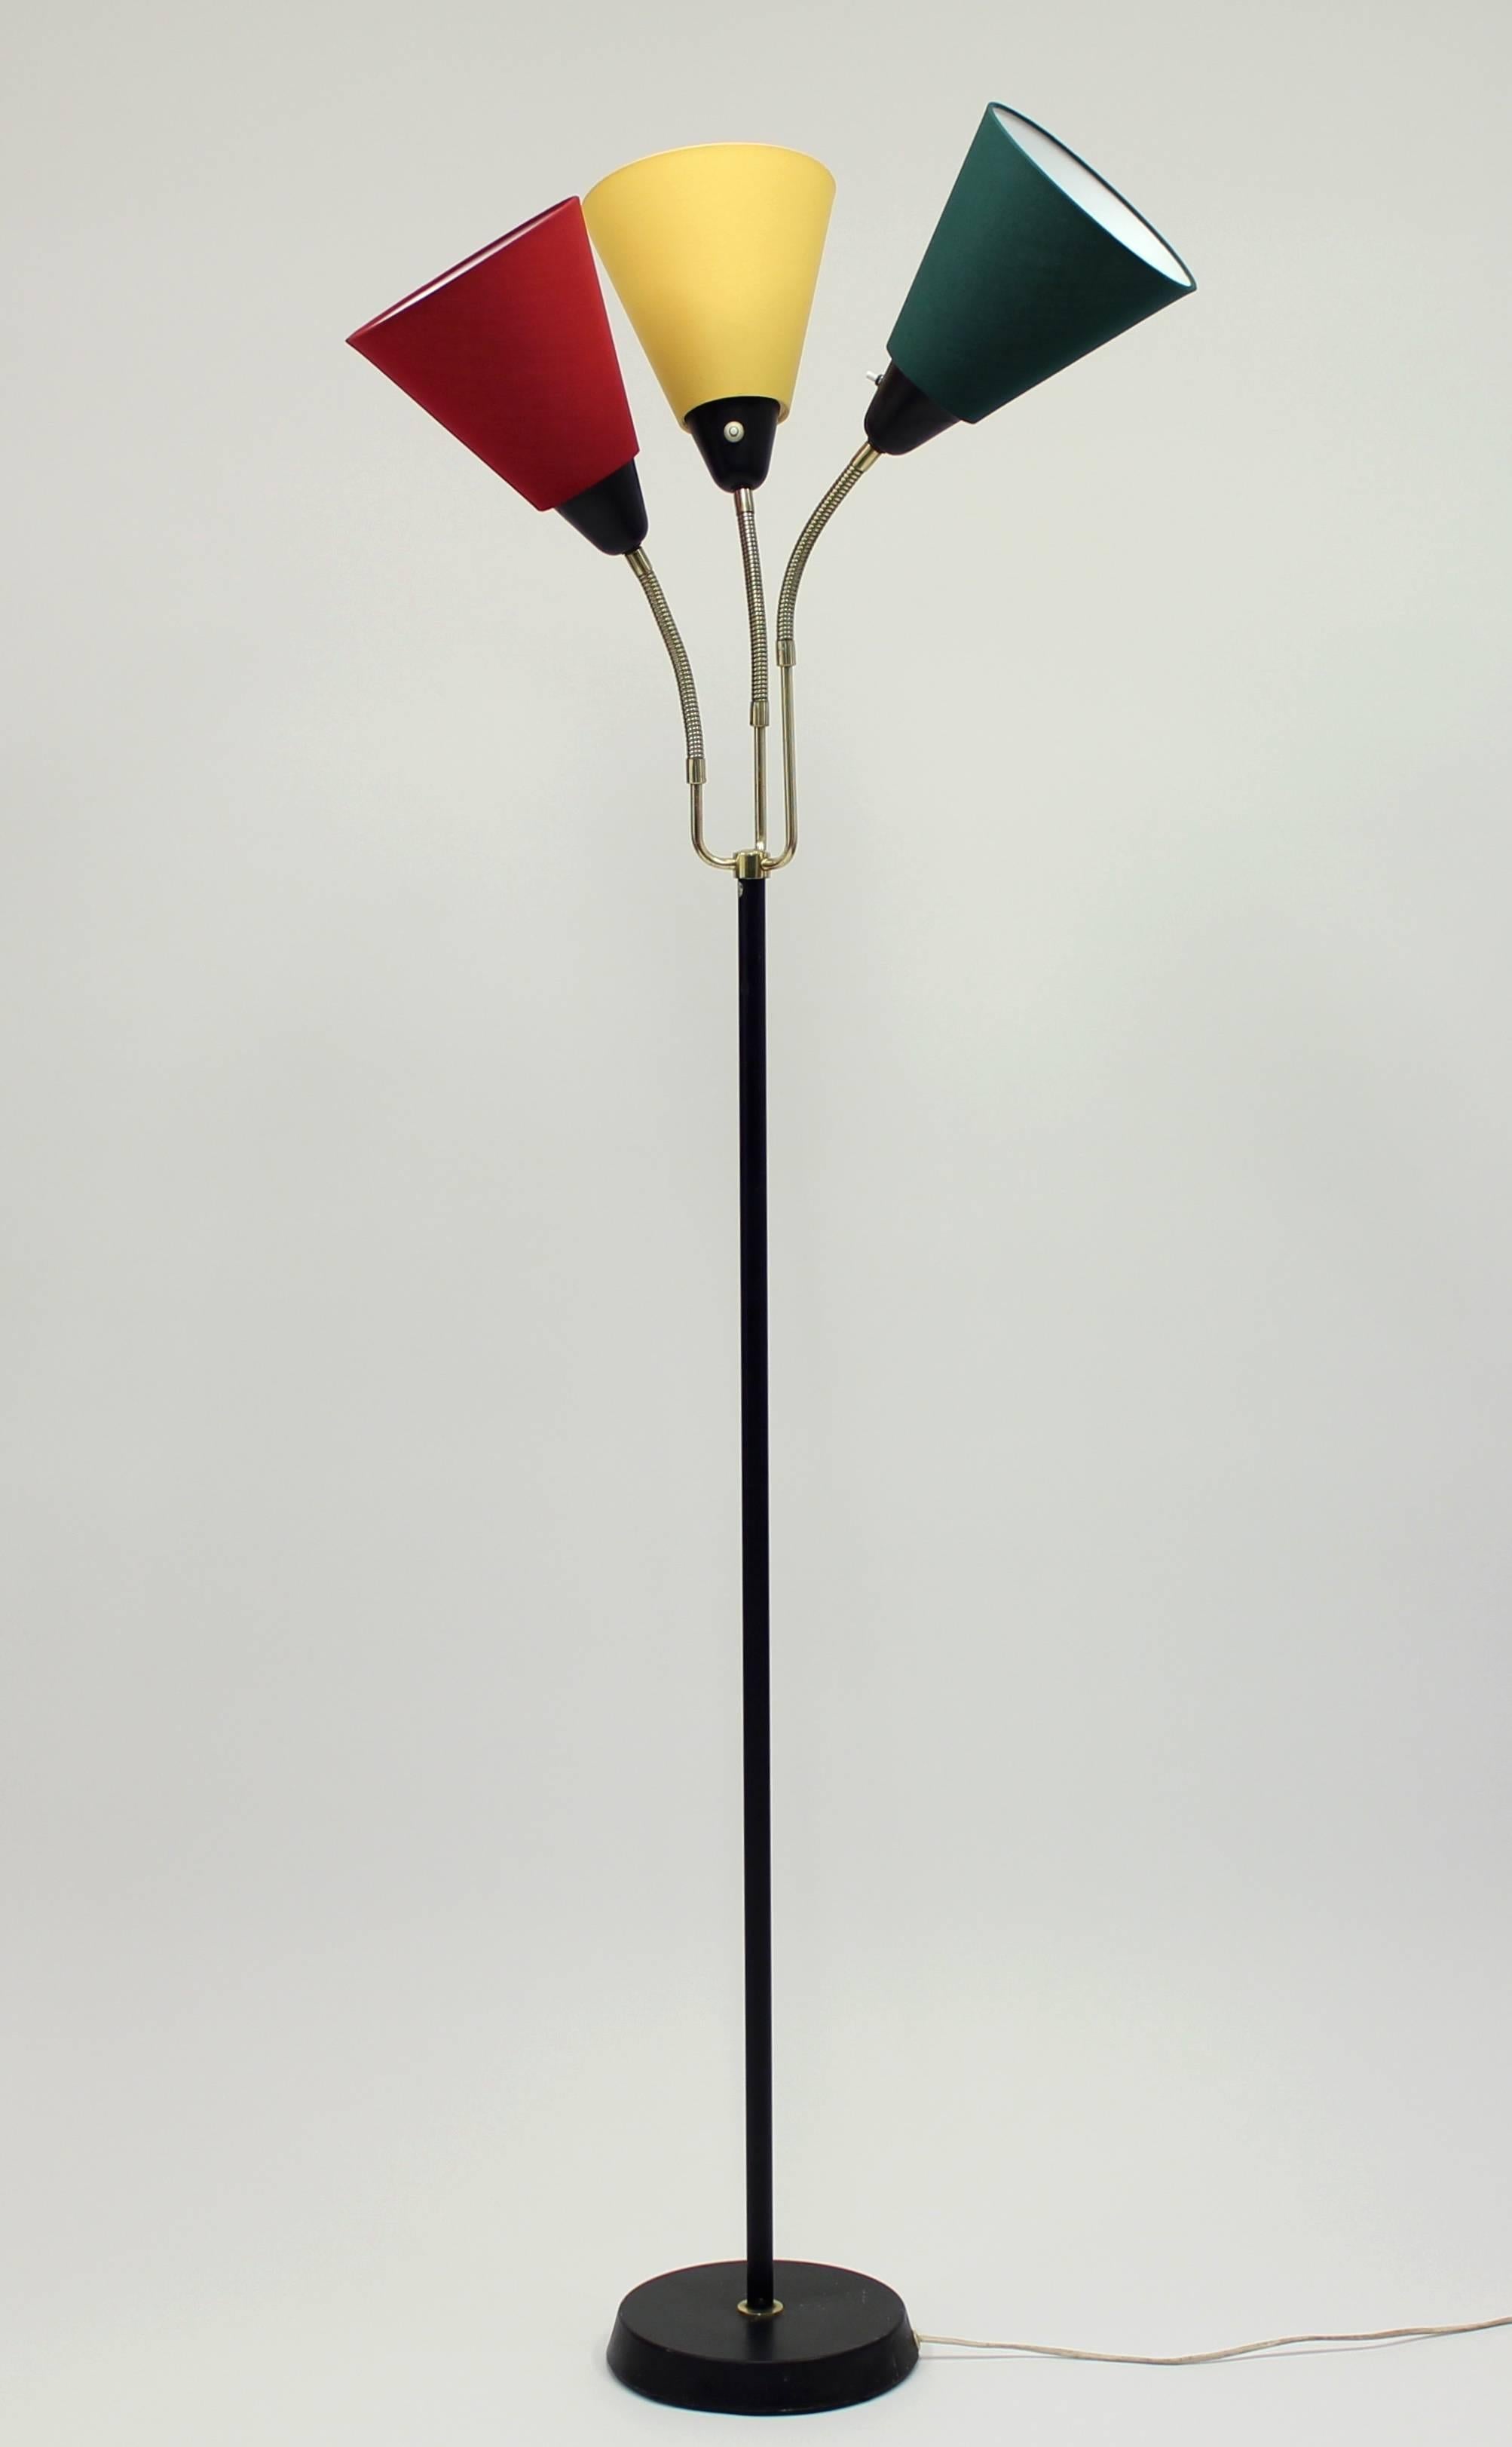 This Swedish midcentury three-light floor lamp was manufactured in the 1950s-1960s. It is made from brass and black metal with three new shades. The three lights have gooseneck arms that are set at slightly different heights with a light switch on